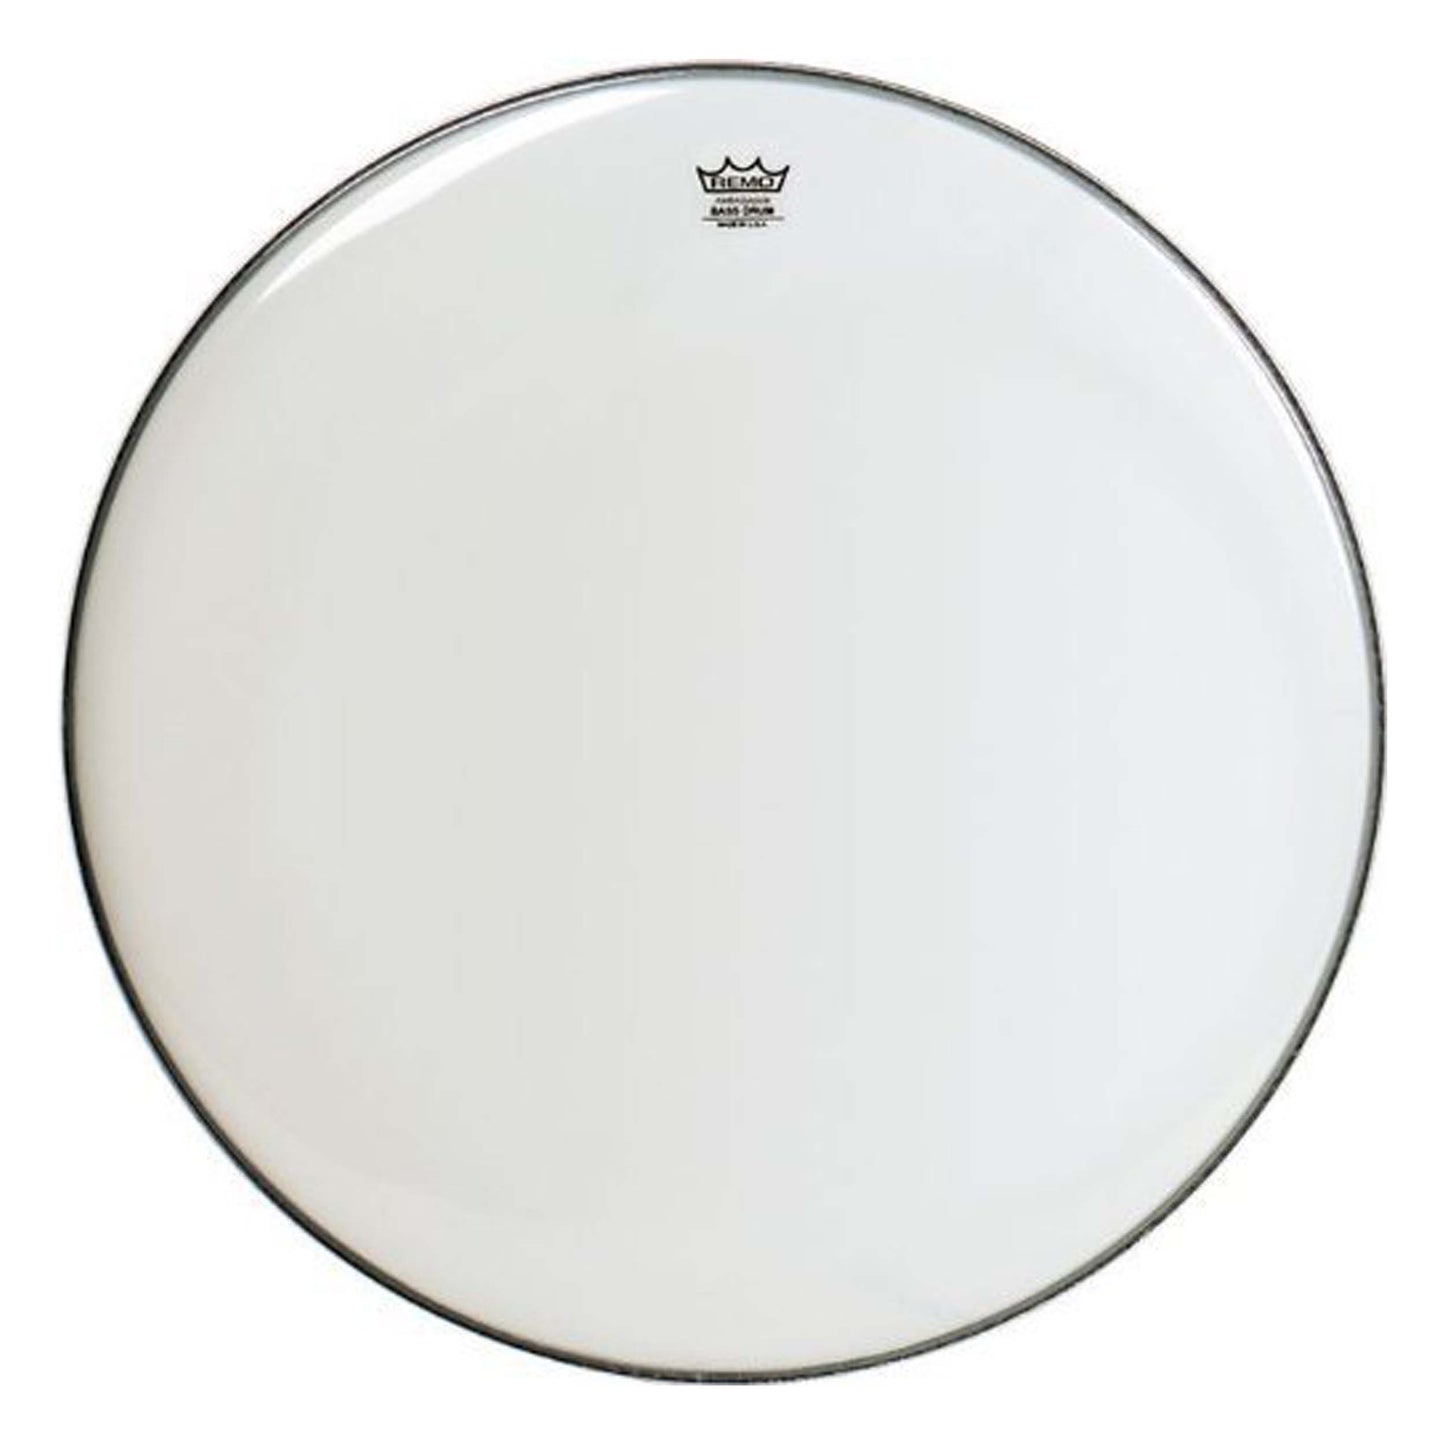 Remo WeatherKing Smooth White Ambassador Bass Drumhead 24 Inches